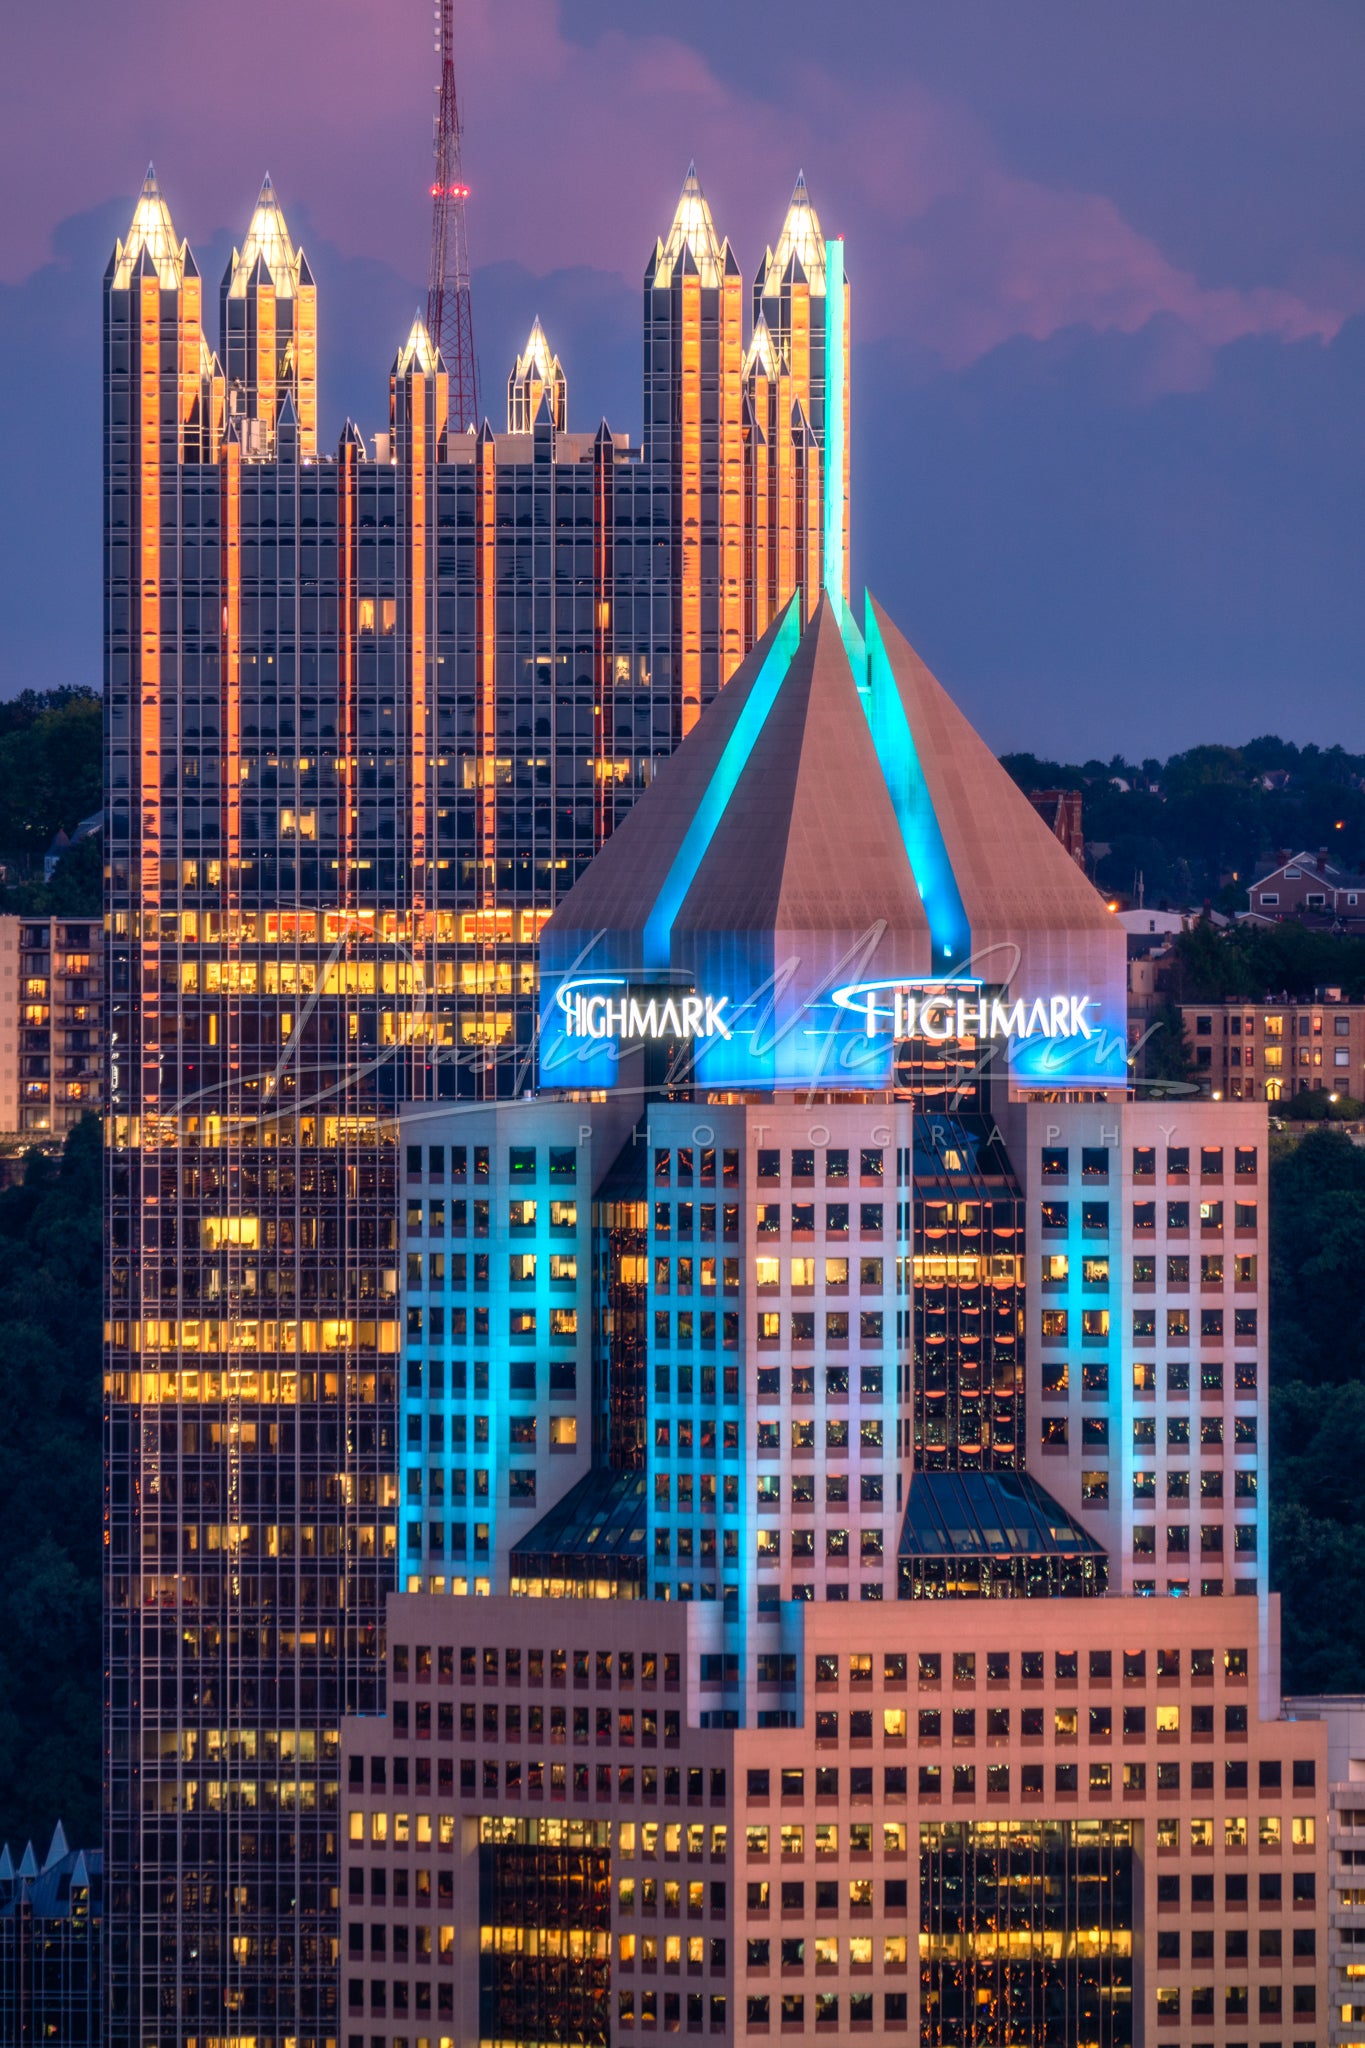 Pittsburgh Skyline Photo - PPG Place and Highmark Building